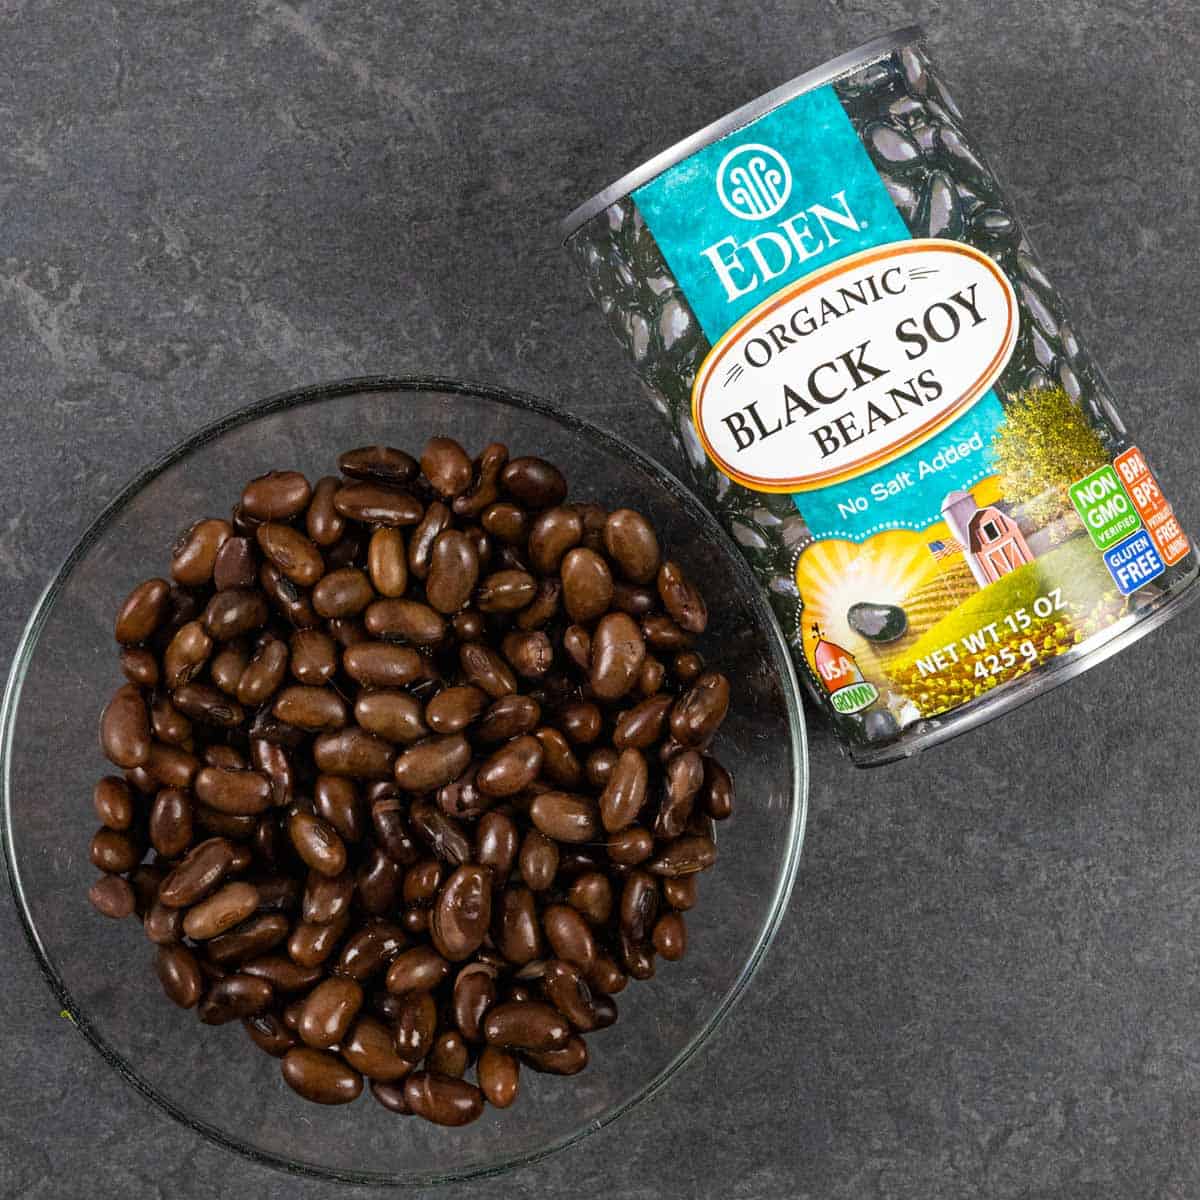 Glass bowl of black soy beans on a grey board next to the can of beans on its side.